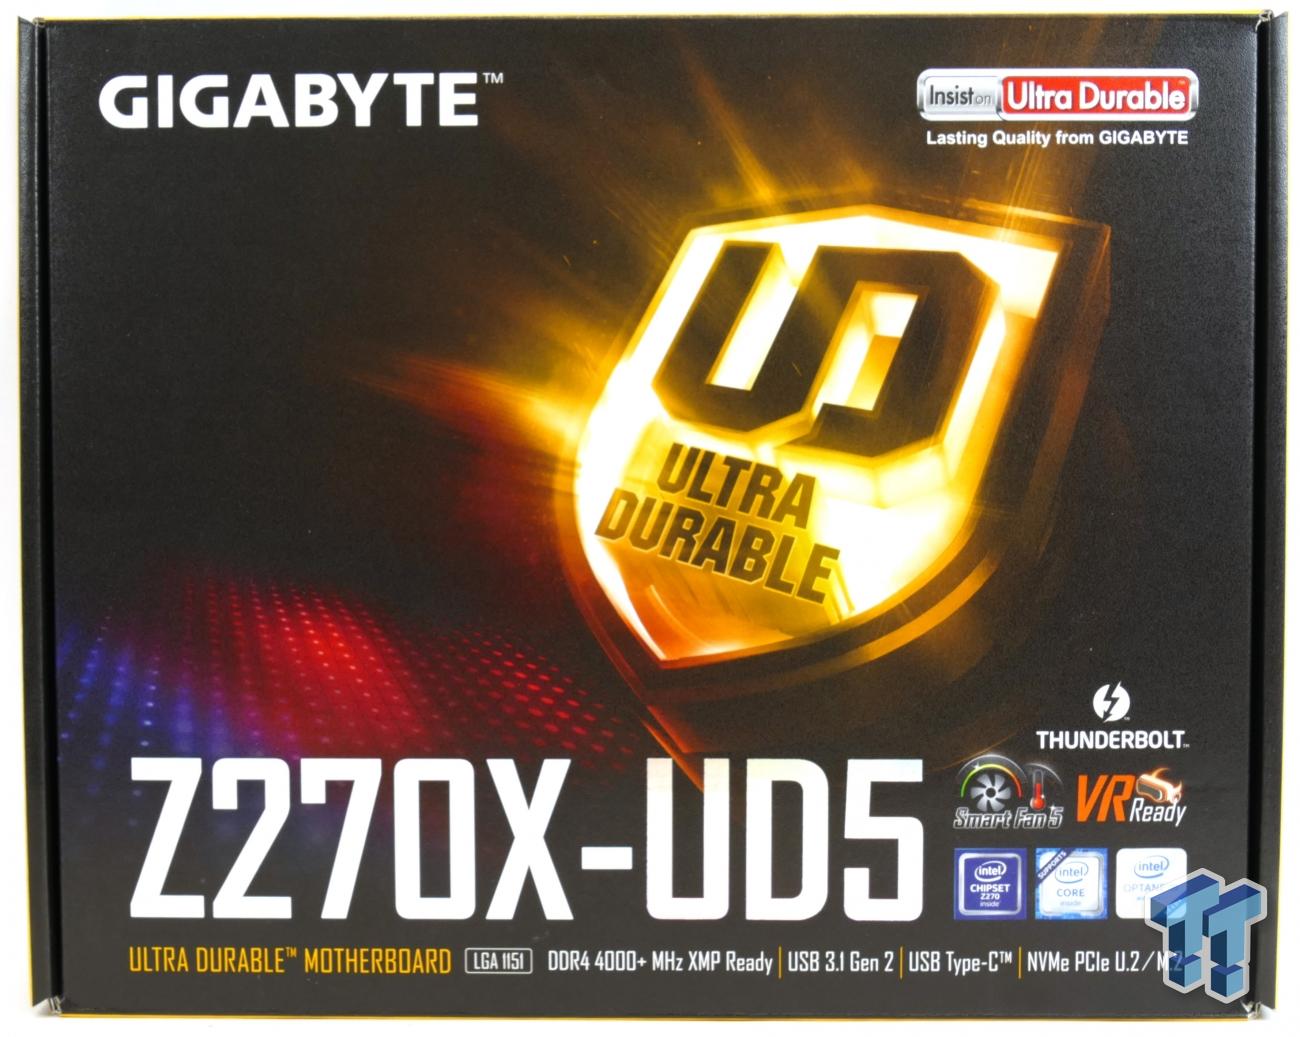 GIGABYTE Z270X-UD5 Motherboard Review